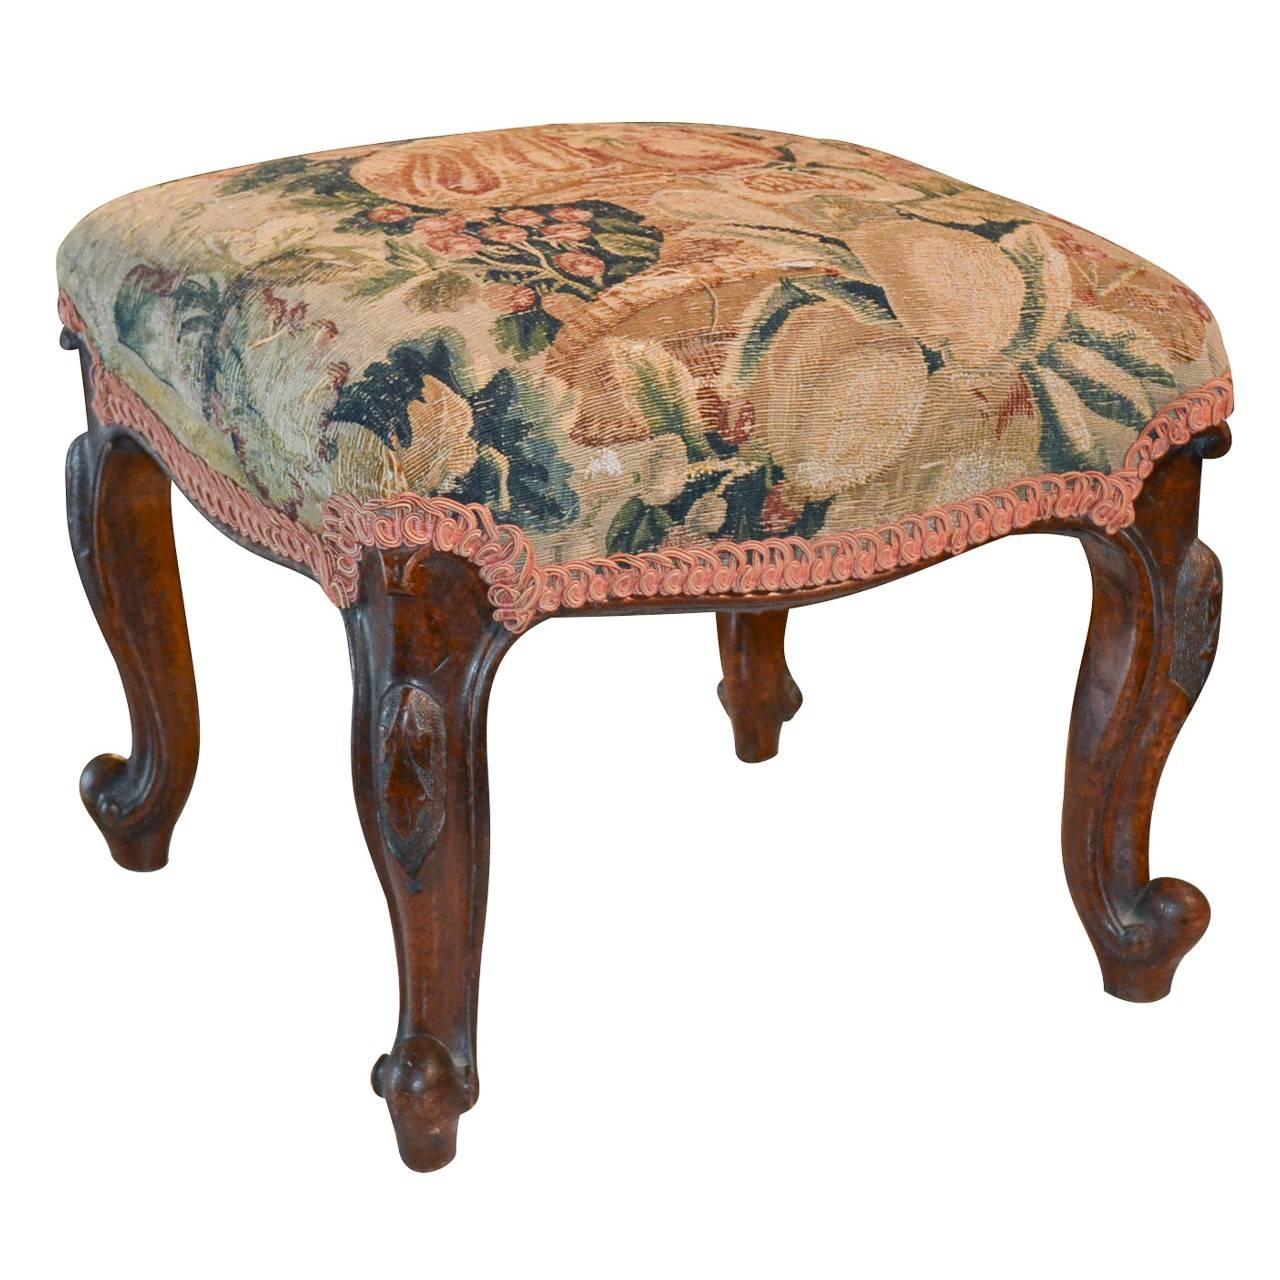 19th Century Continental Carved Stool with Aubusson